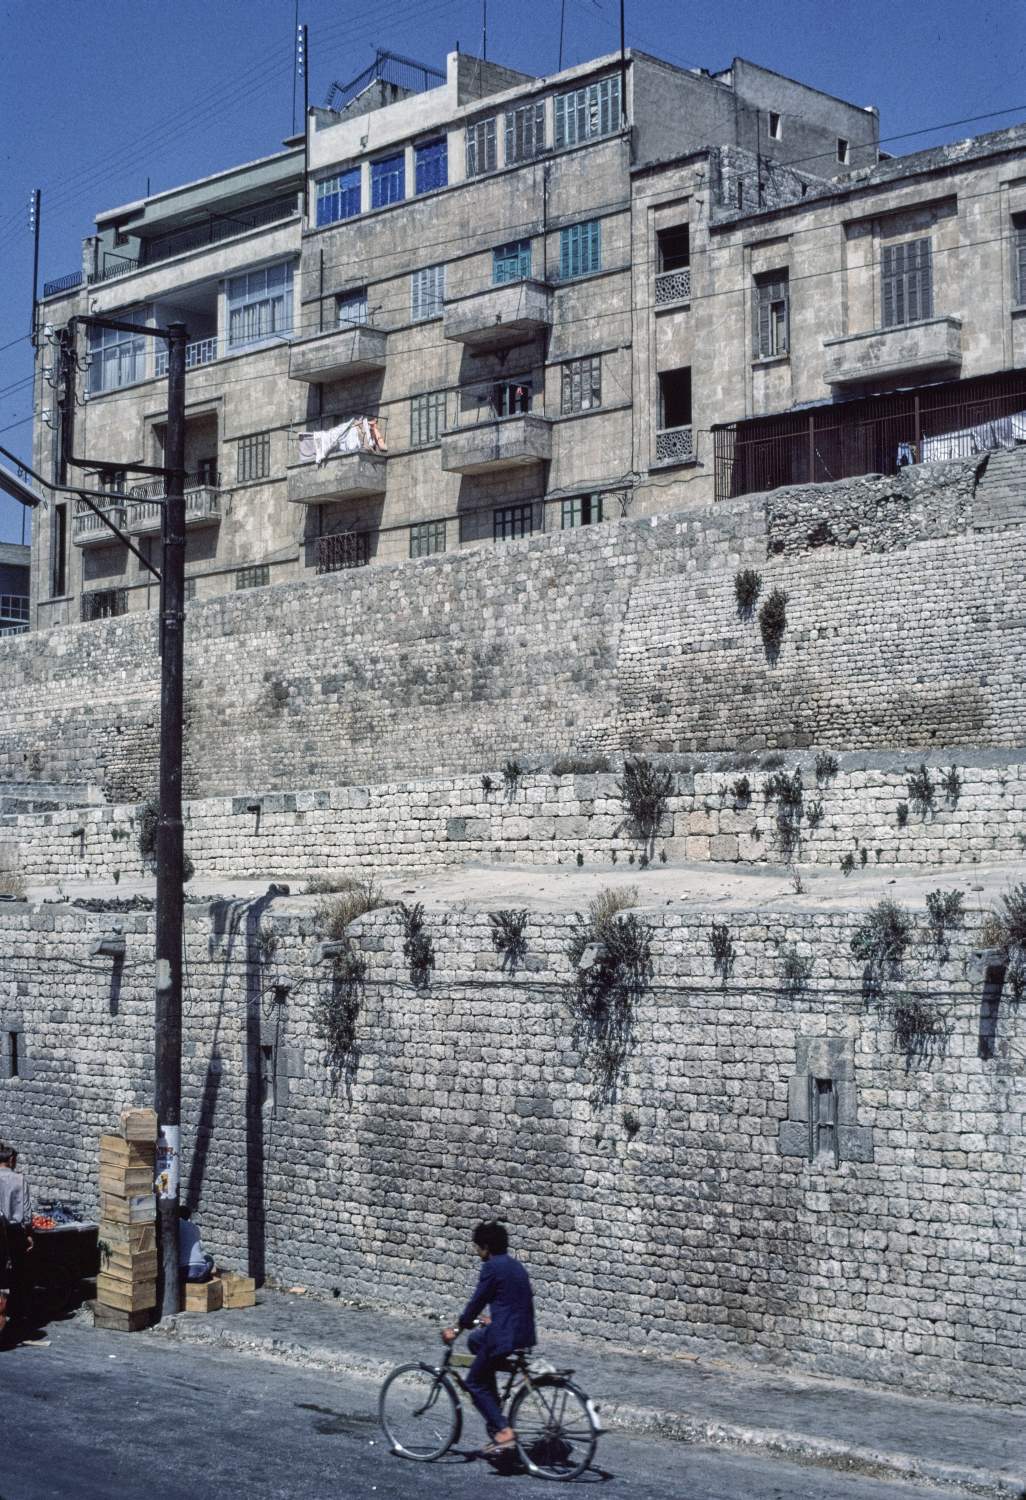 View of walls and modern buildings rising behind.